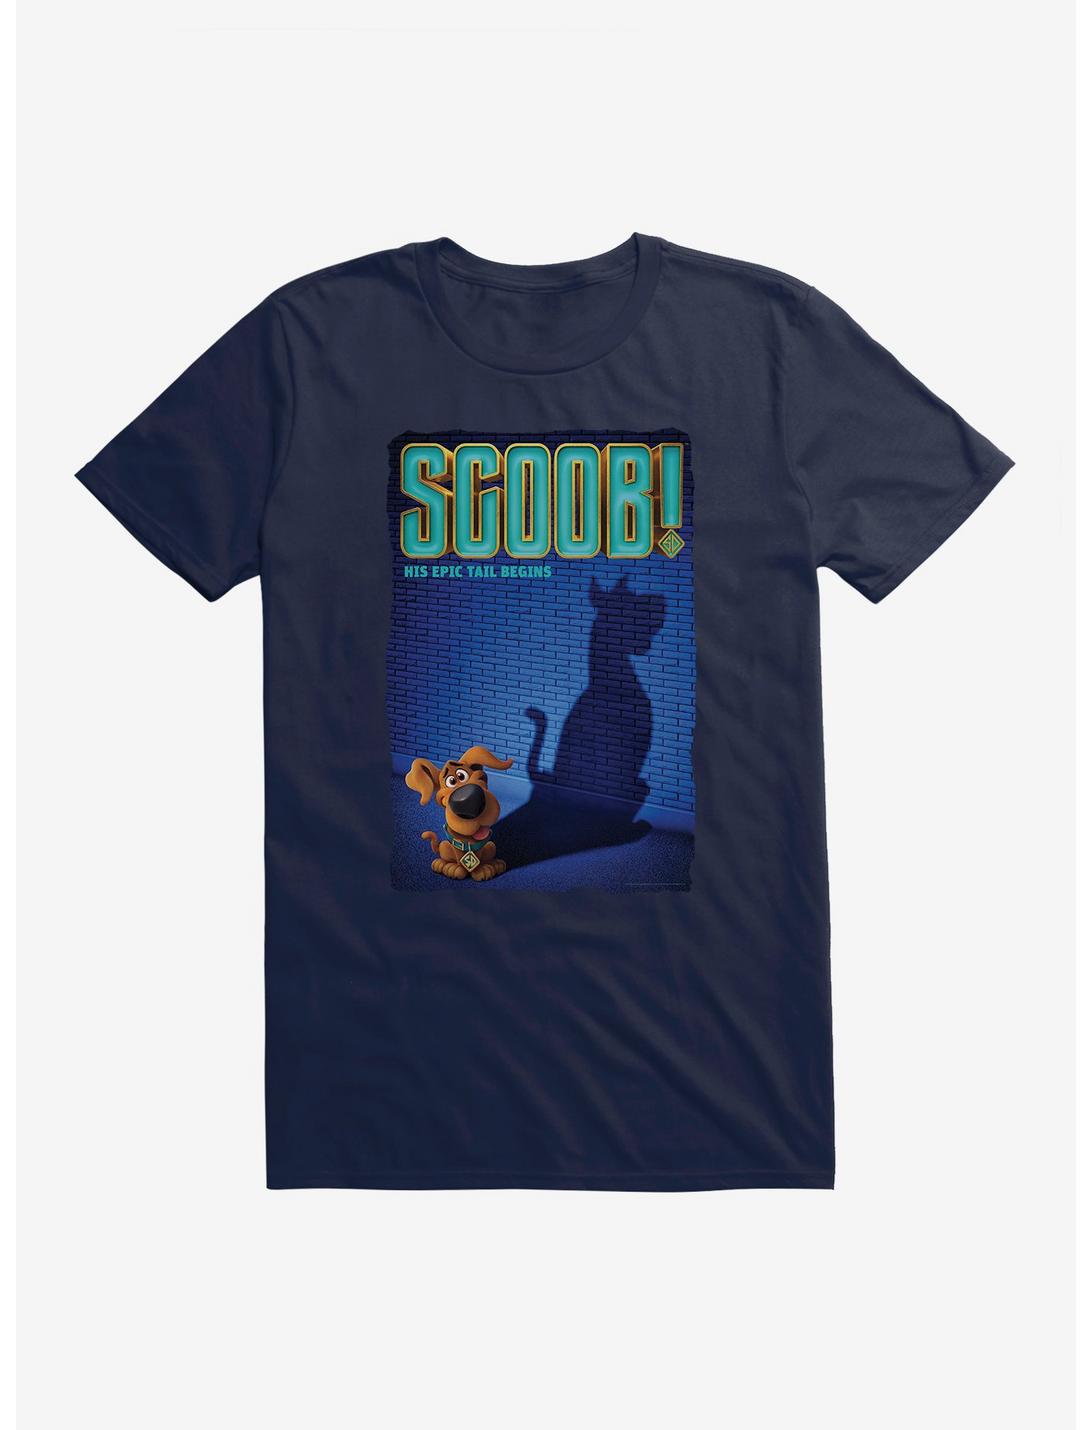 Scoob! Movie His Epic Tail T-Shirt, MIDNIGHT NAVY, hi-res